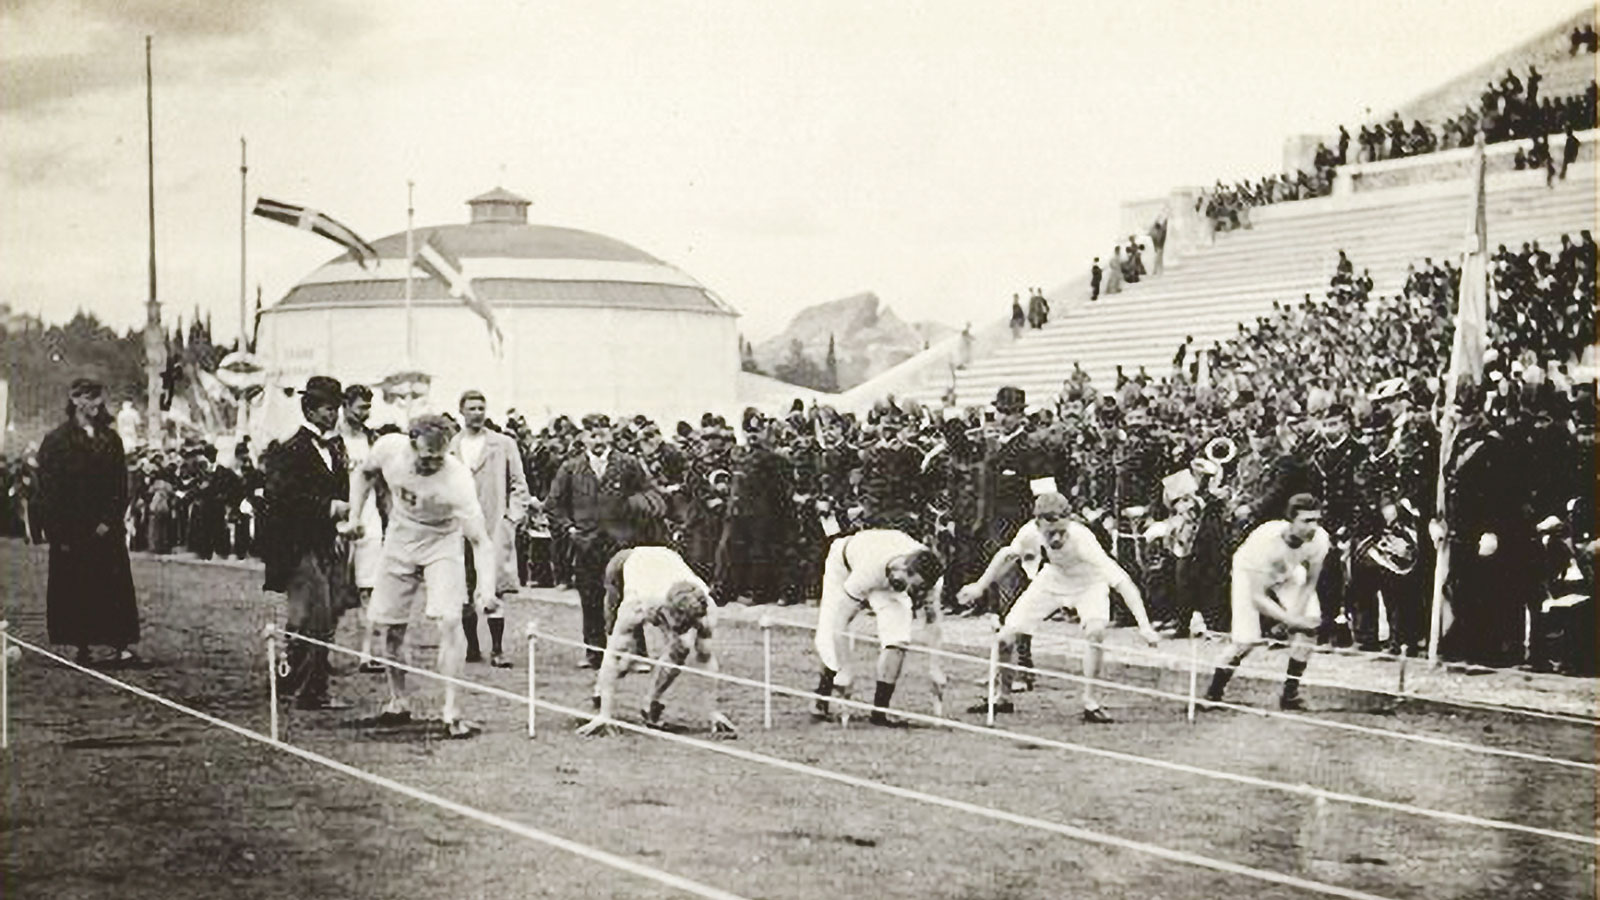 Runnings preparing for a race at the 1896 Summer Olympics